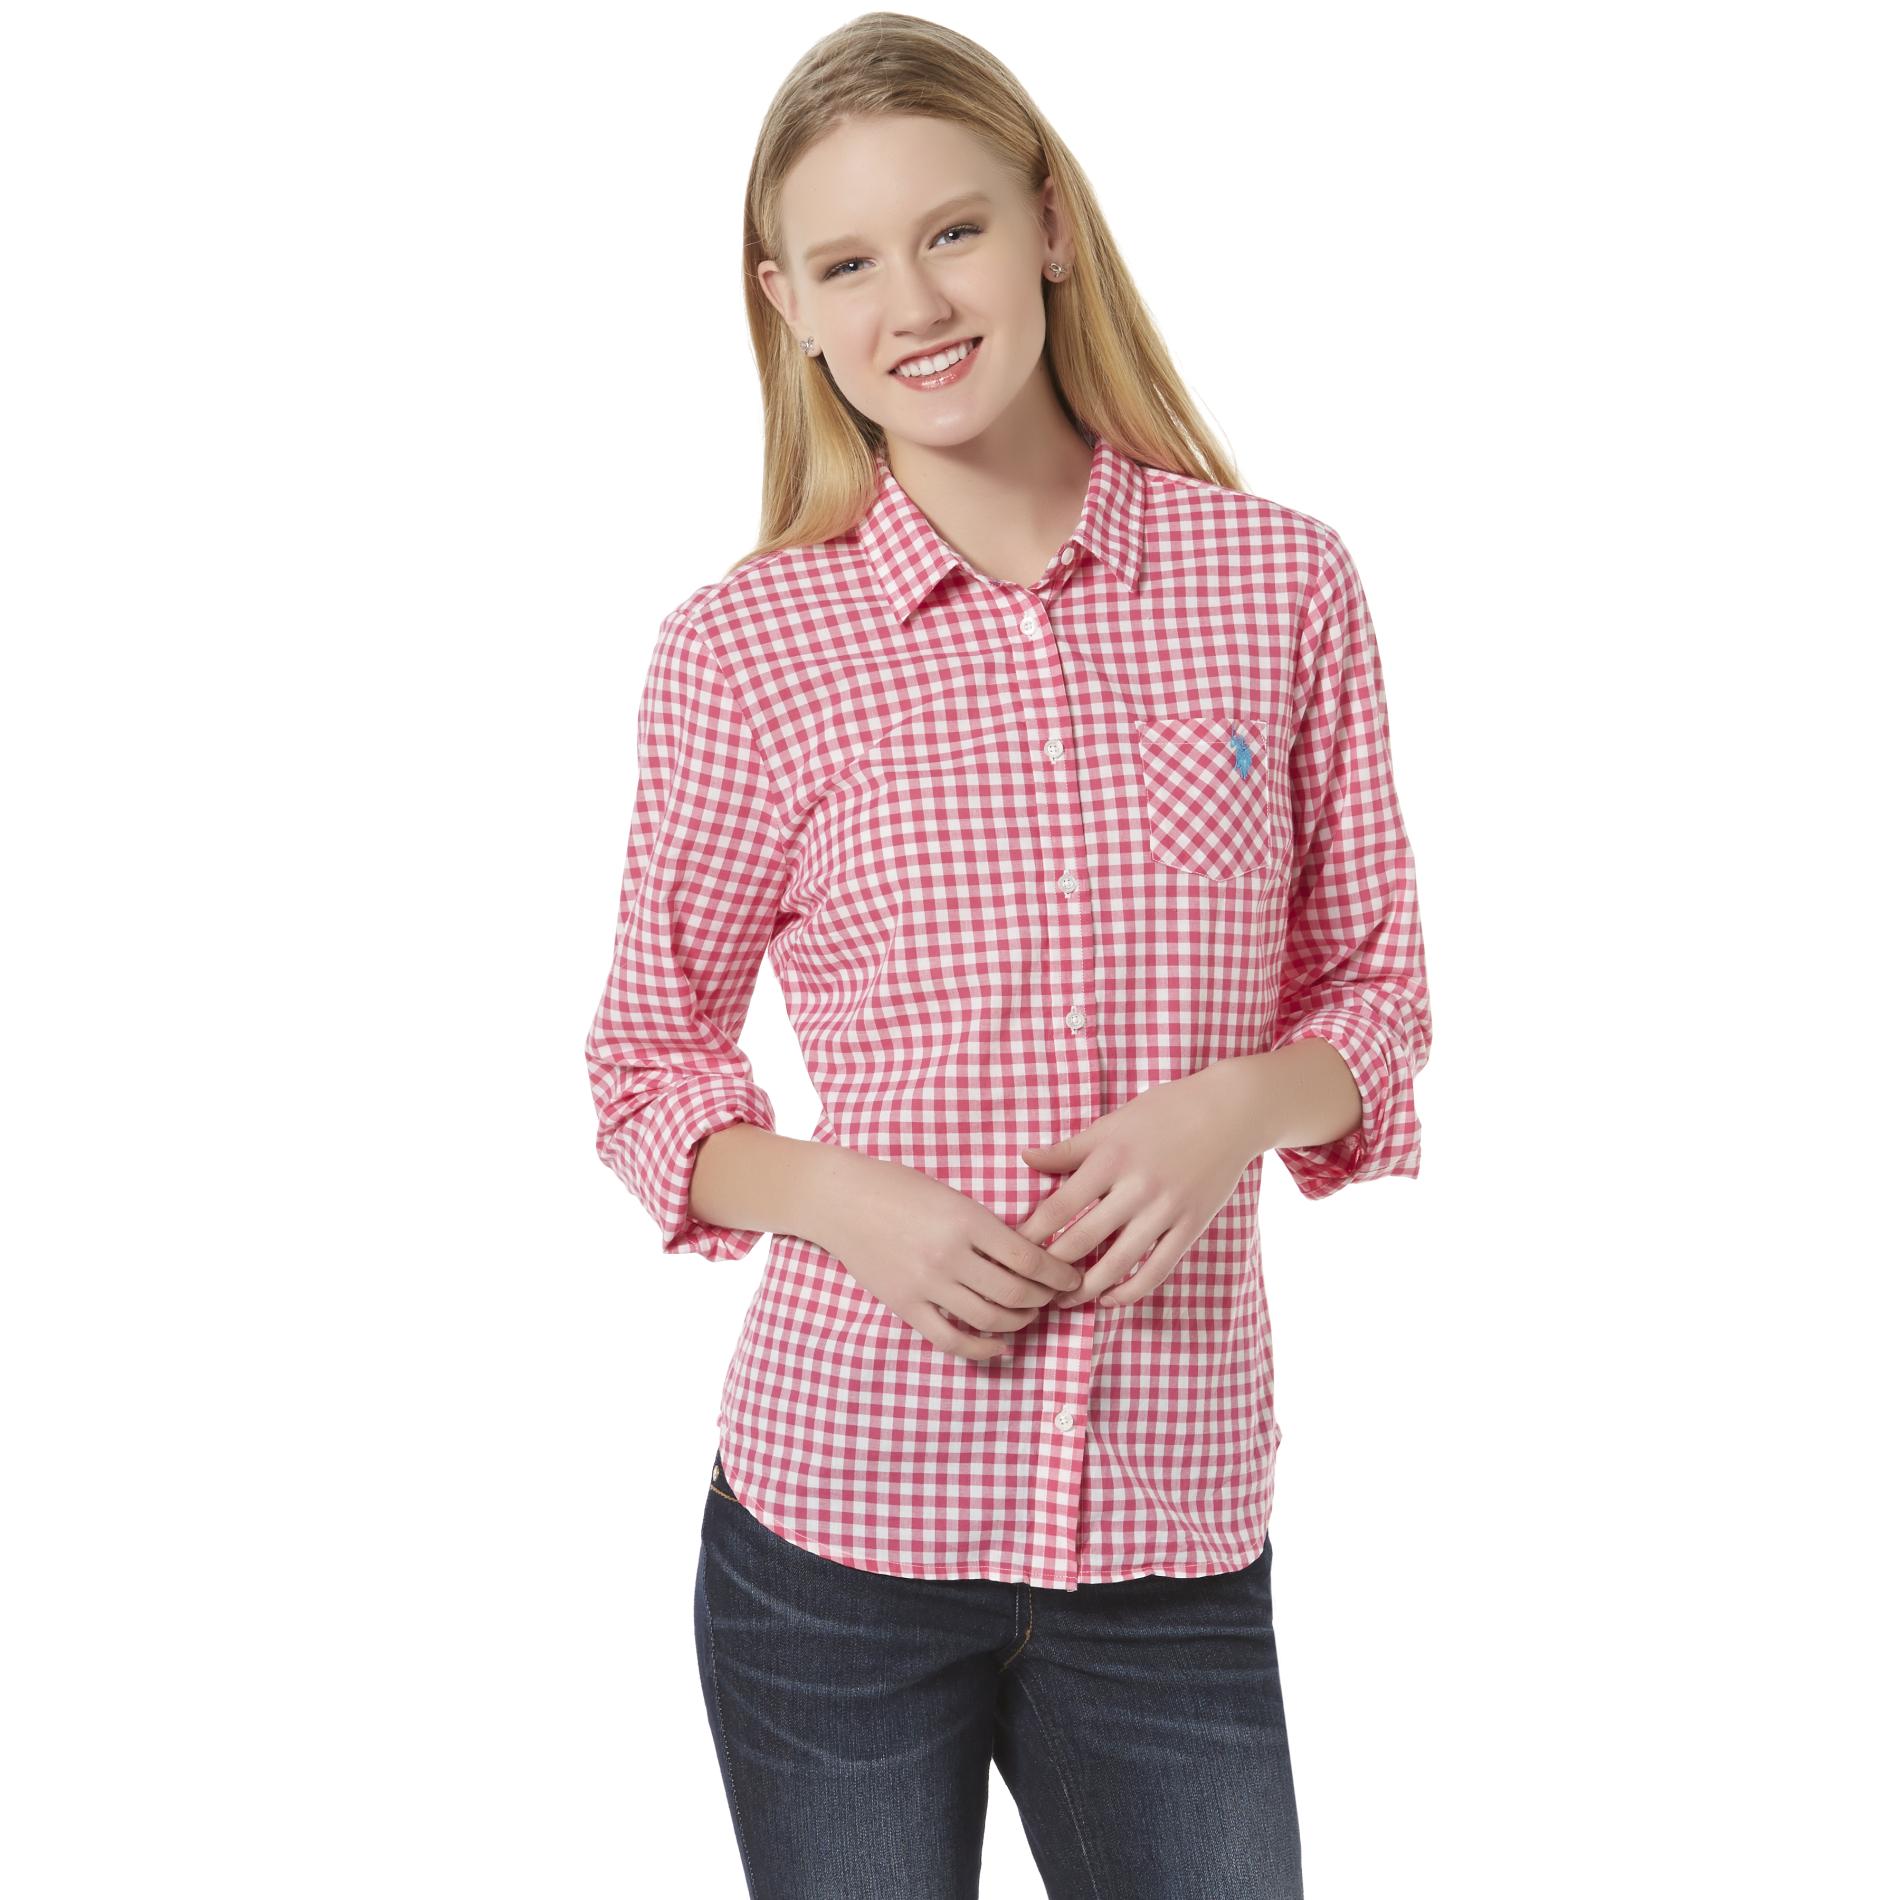 U.S. Polo Assn. Junior's Tie-Front Shirt - Gingham Check